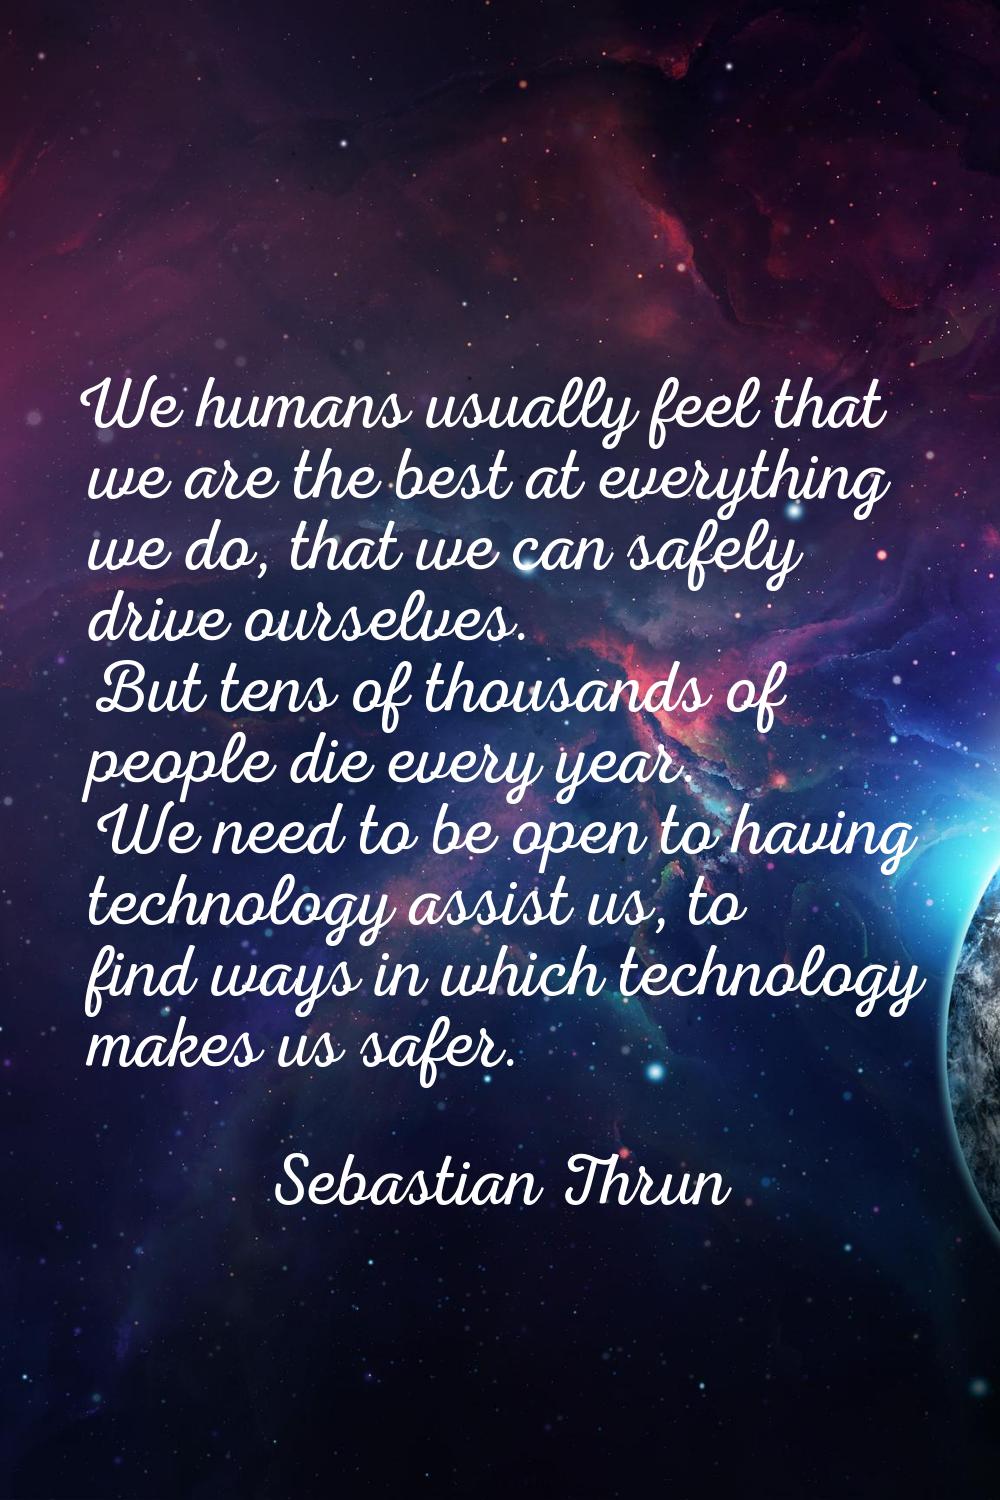 We humans usually feel that we are the best at everything we do, that we can safely drive ourselves